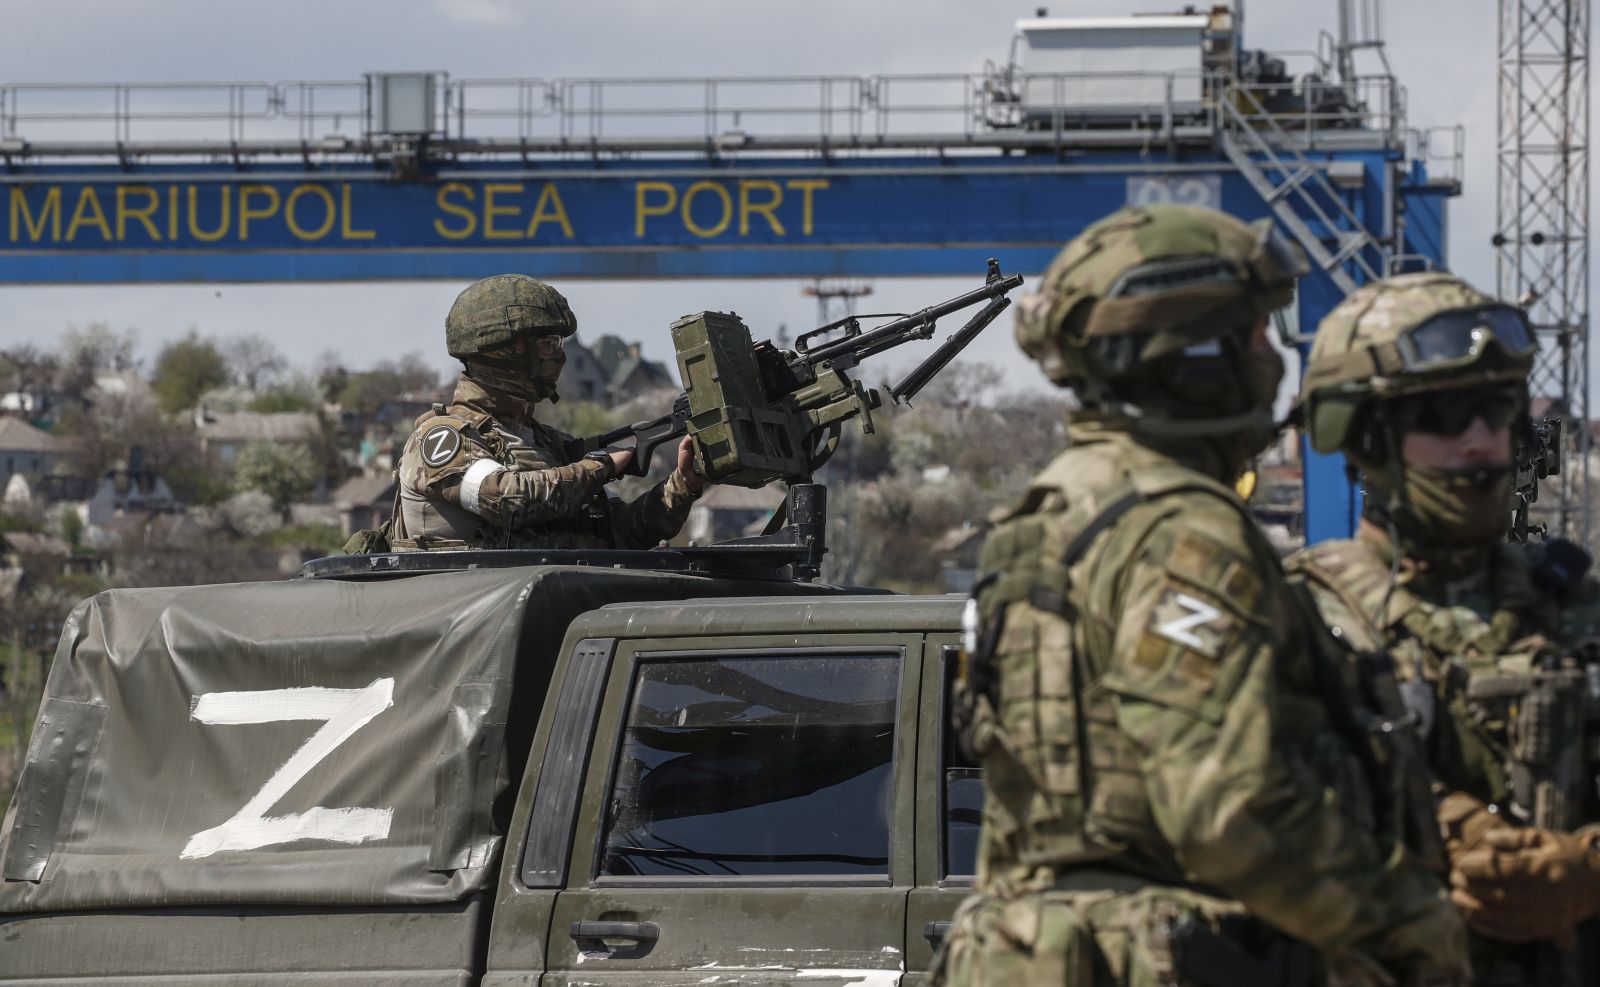 epa09917501 A picture taken during a visit to Mariupol organized by the Russian military shows Russian servicemen guard the territory of the cargo sea port in Mariupol, Ukraine, 29 April 2022. Mariupol is located on the northern coast of the Sea of Azov, it is one of the largest commercial seaports in Ukraine. Almost 500 thousand people previously lived in the city. On 16 April, the Russian Defense Ministry announced that the urban area of Mariupol had been cleared of the Ukrainian military, and their remnants were completely blocked on the territory of the Azovstal metallurgical plant. On 24 February Russian troops had entered Ukrainian territory in what the Russian president declared a 'special military operation', resulting in fighting and destruction in the country, a huge flow of refugees, and multiple sanctions against Russia.  EPA/SERGEI ILNITSKY